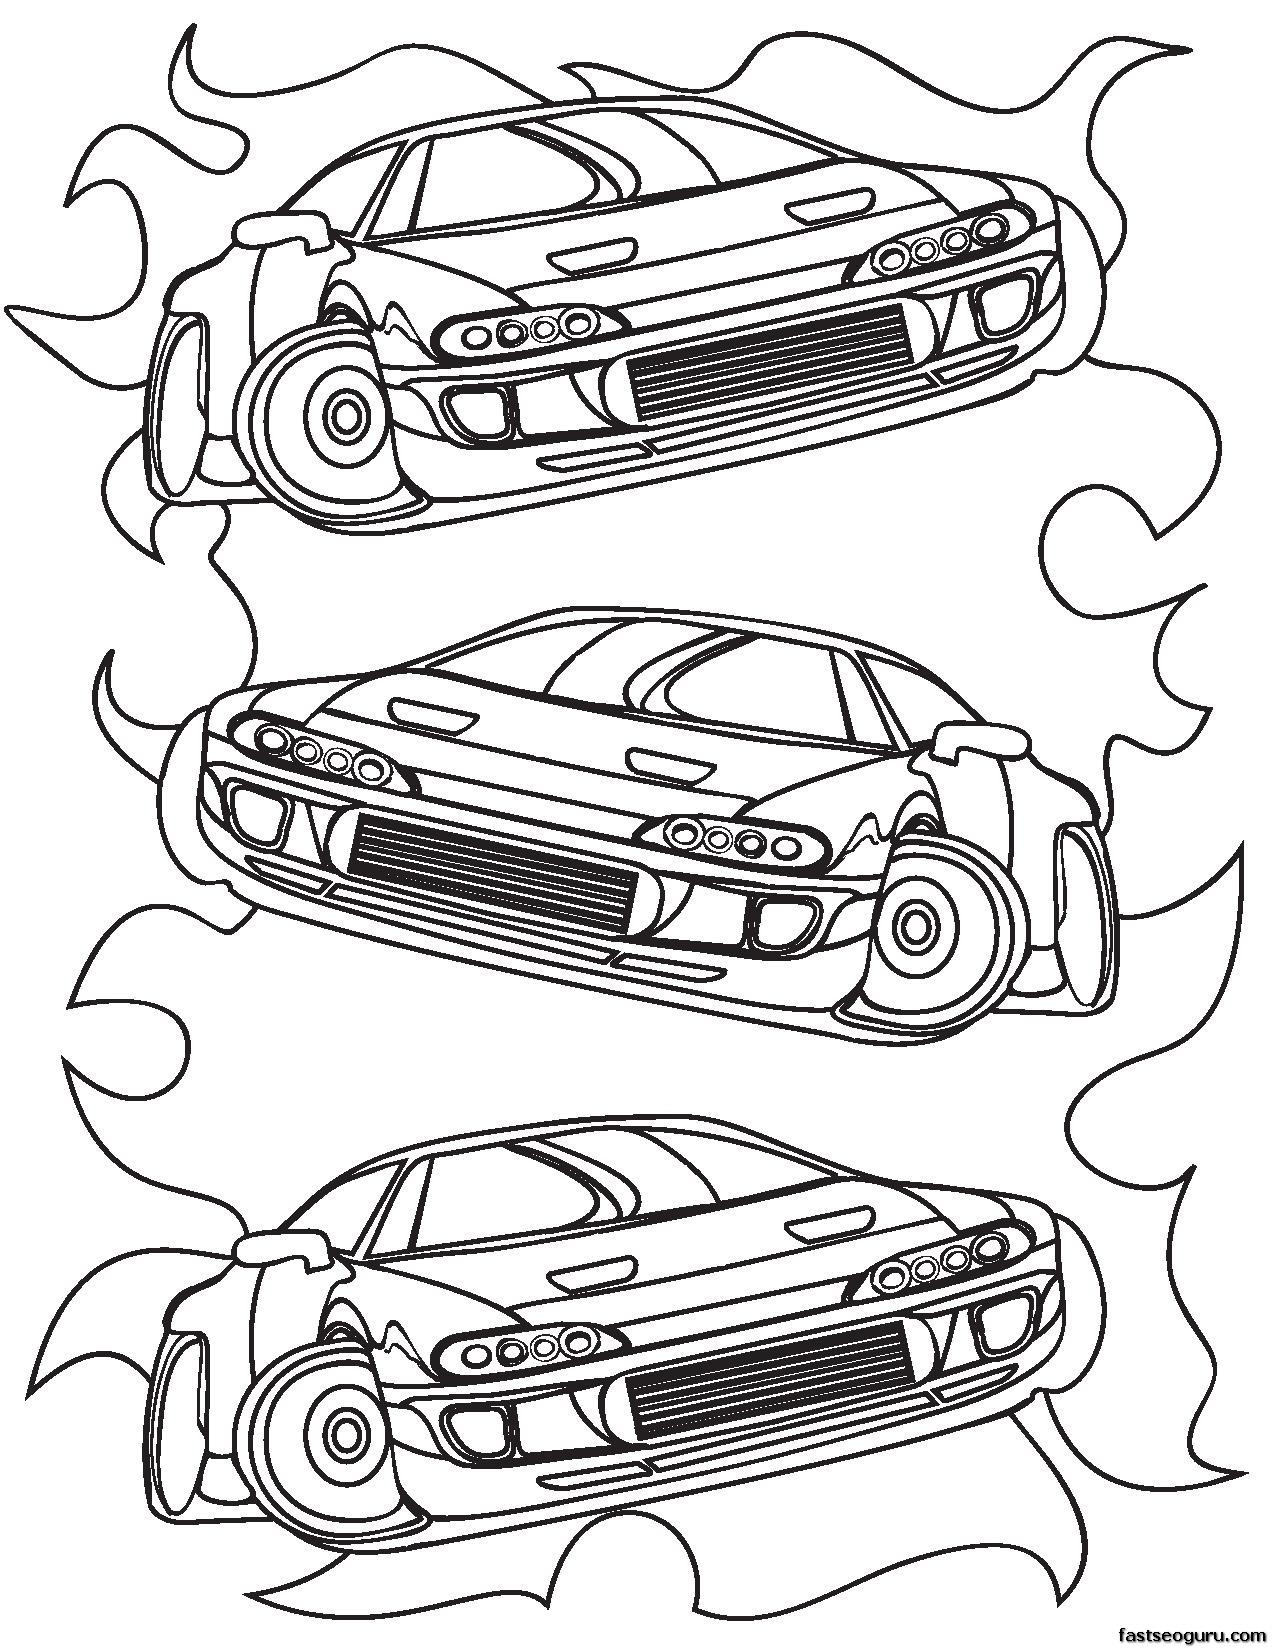 Coloring Pages Of Cars For Boys
 1000 images about Car truck birthday party on Pinterest